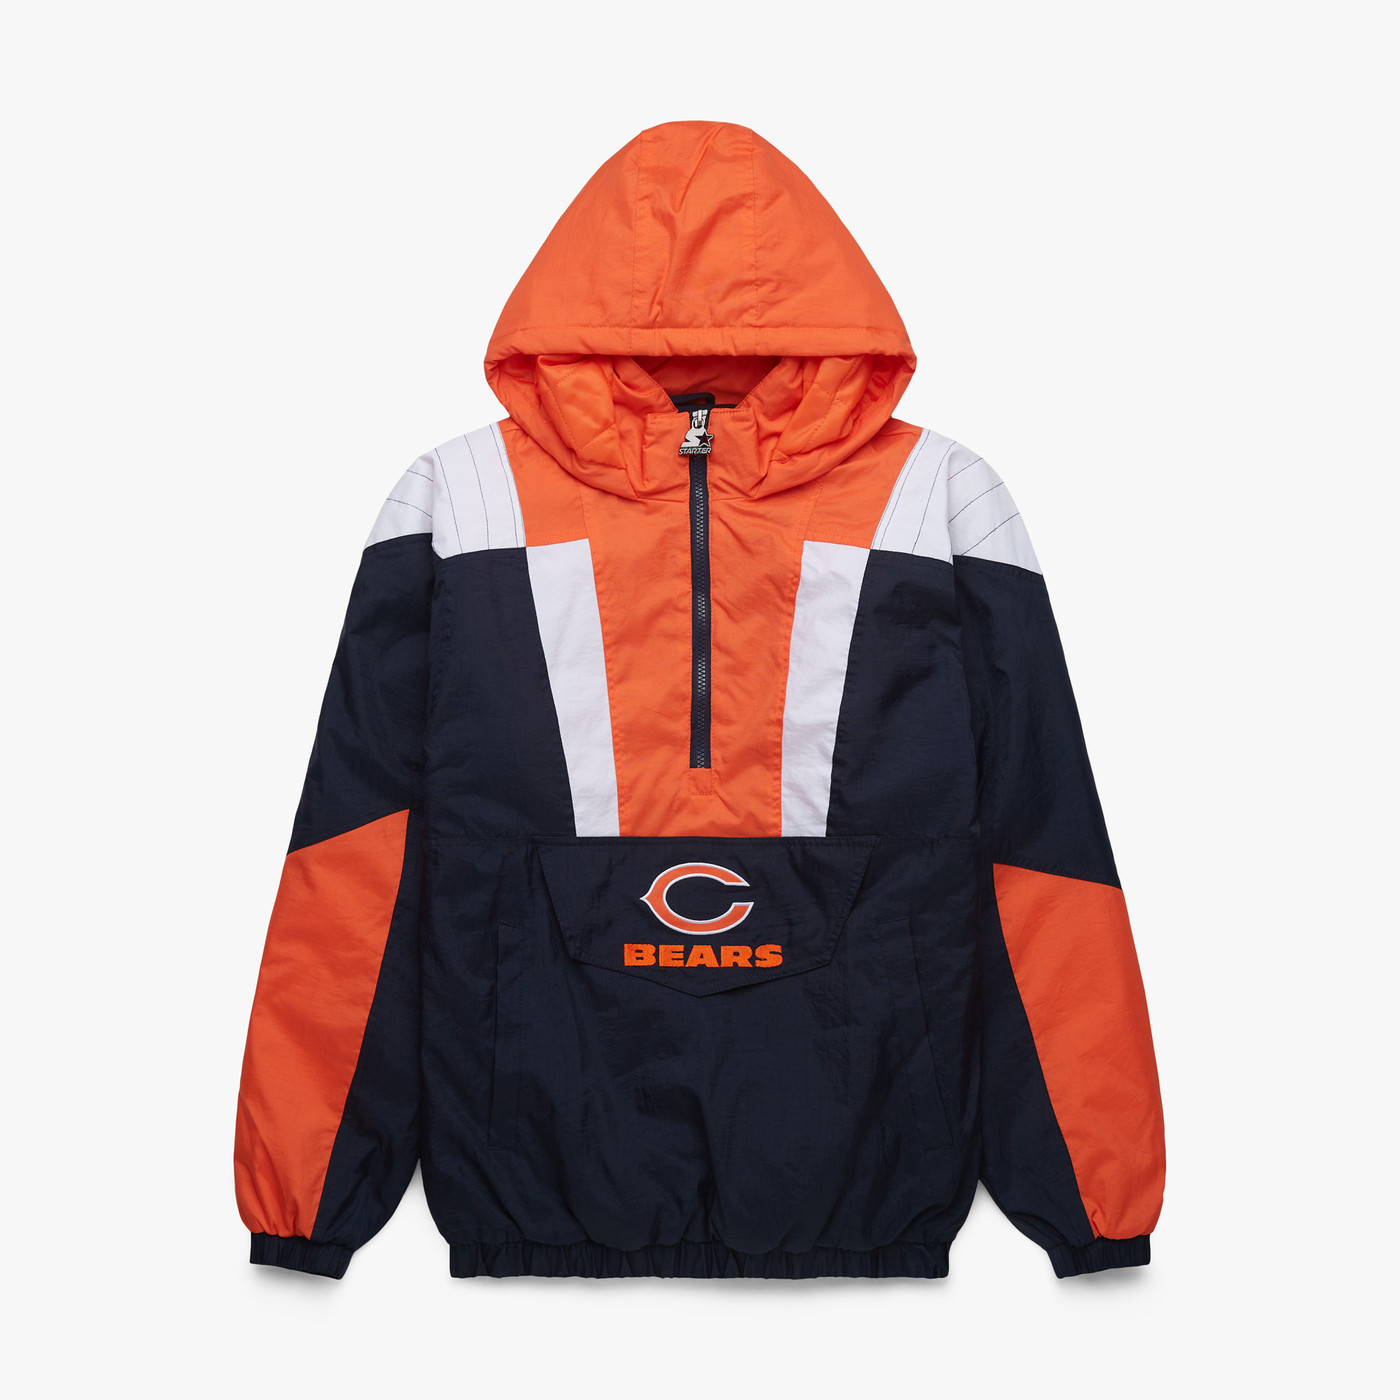 Starter NFL Pullover Jackets now available! - Windy City Gridiron